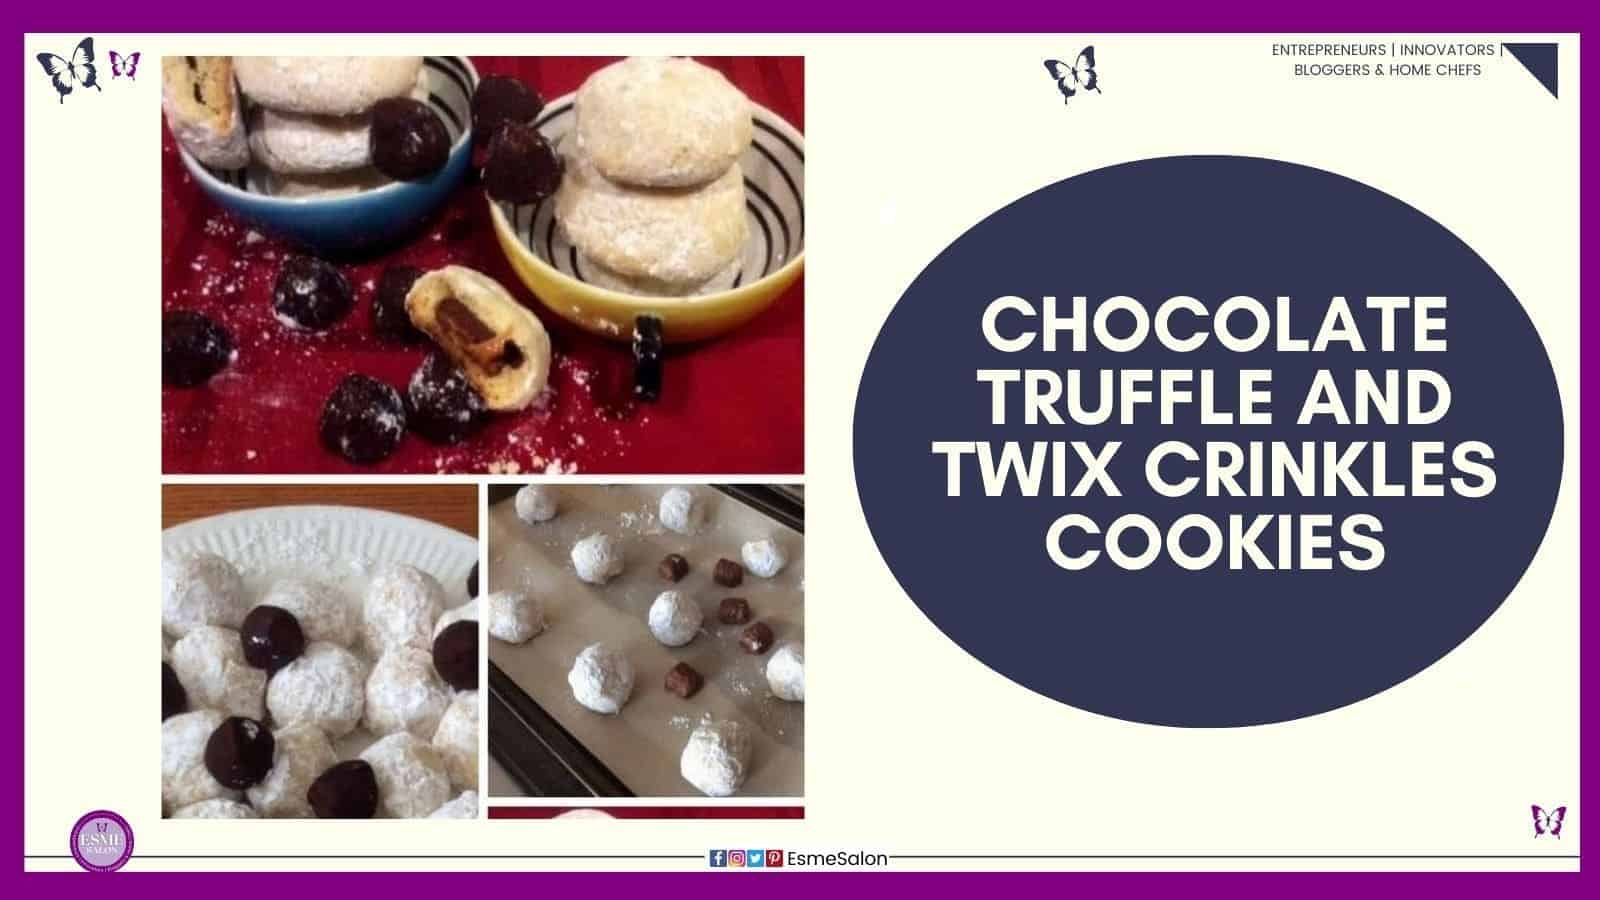 an image of two colored bowls with Chocolate Truffle and Twix Crinkles Cookies with surprise fillings in the middle